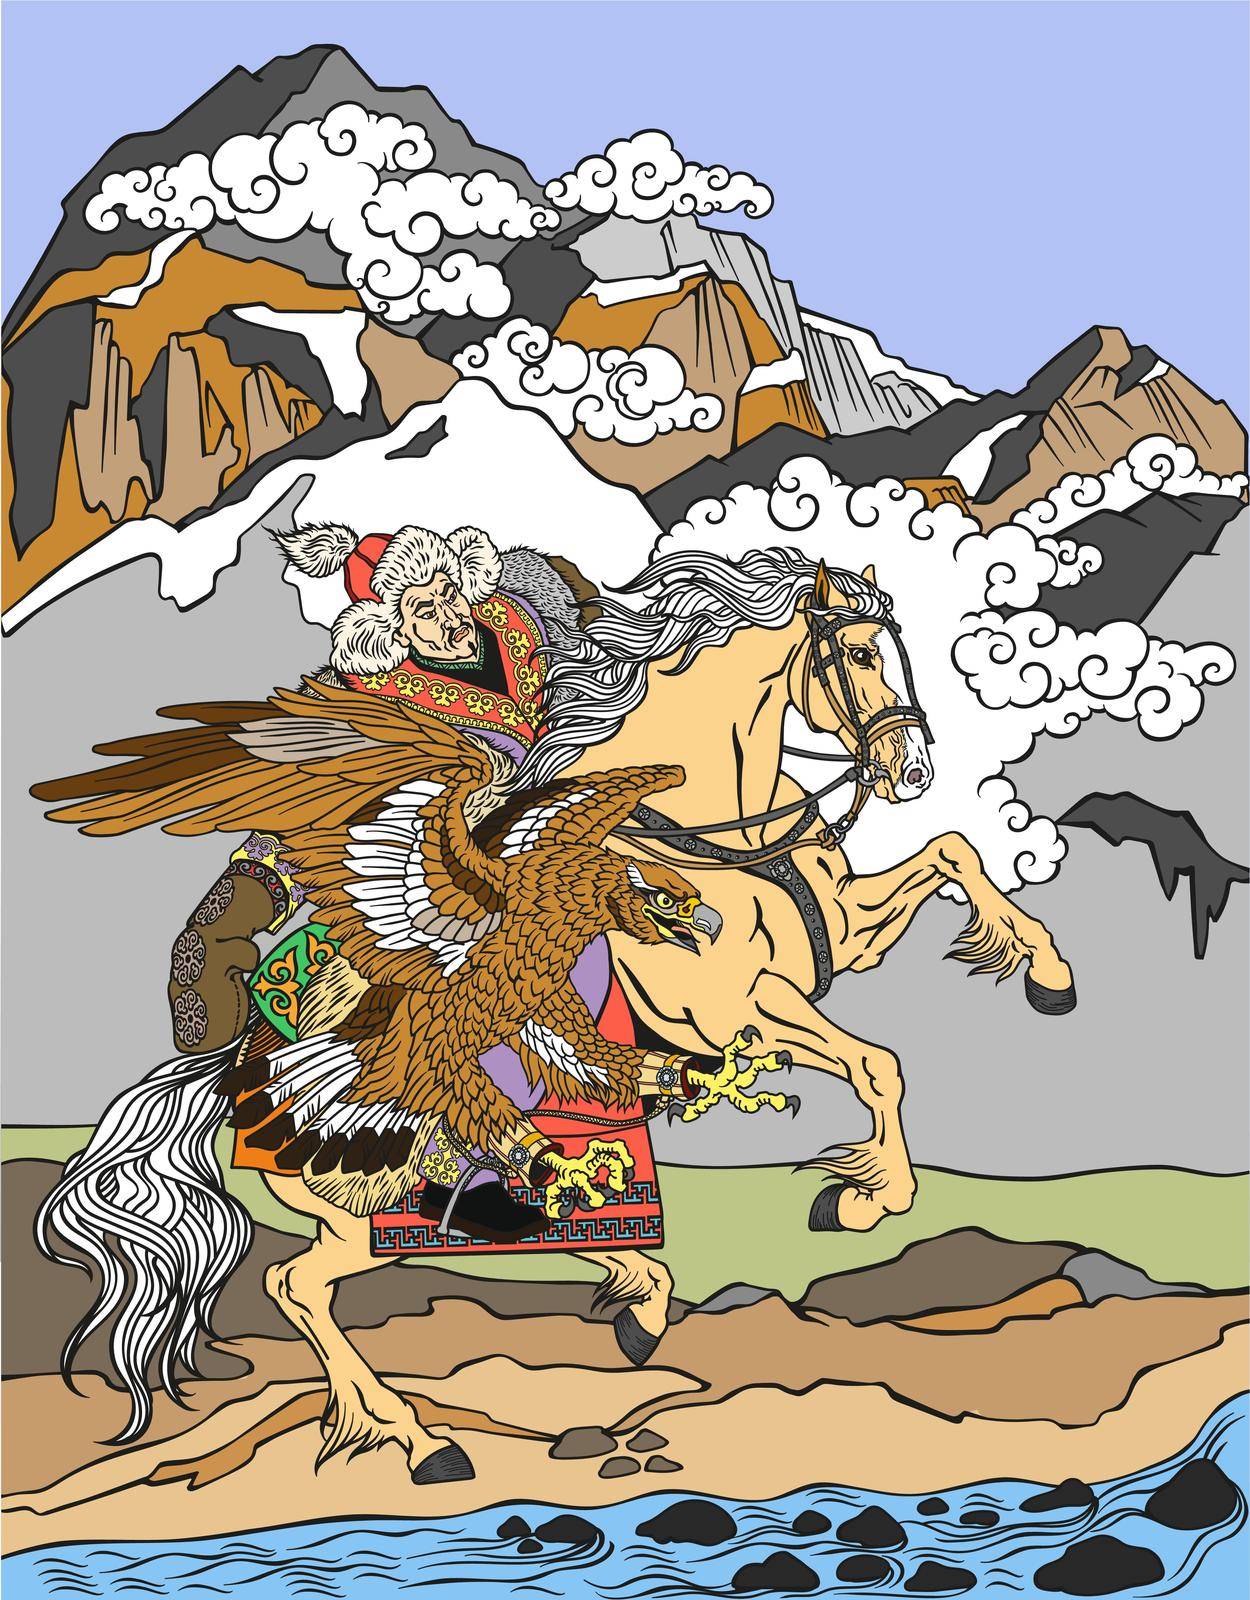 Hunting with a golden eagle on a horse. Kazakh nomad hunter wearing a fur jacket, hat and skin gloves and sitting on pony horseback in the gallop. Traditional falconry in the Eurasian Steppe. Illustration